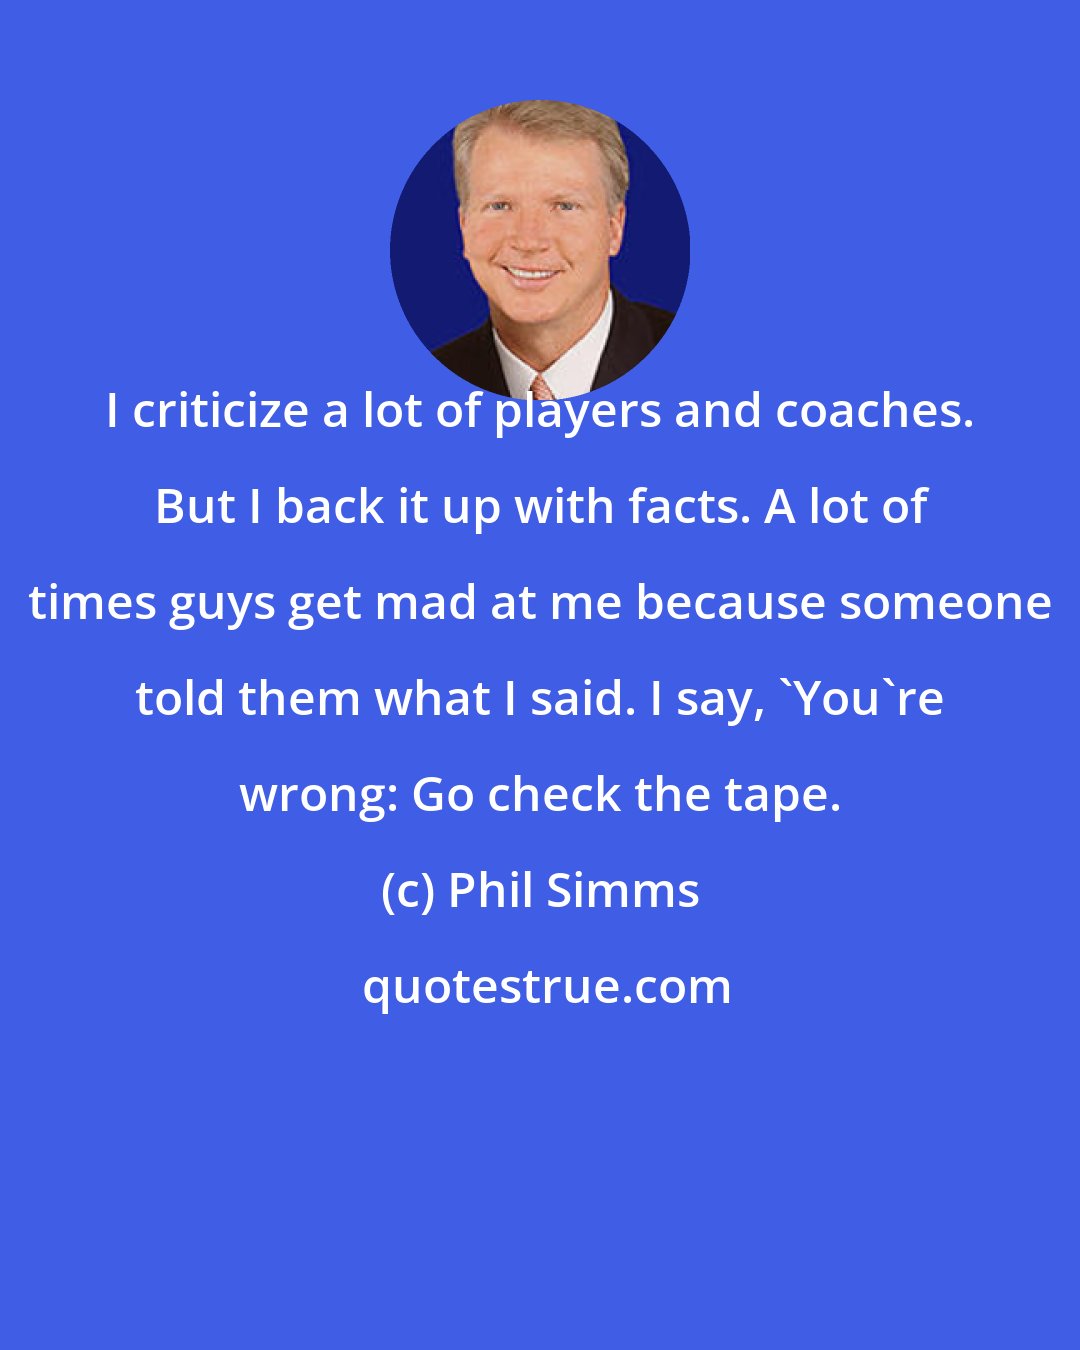 Phil Simms: I criticize a lot of players and coaches. But I back it up with facts. A lot of times guys get mad at me because someone told them what I said. I say, 'You're wrong: Go check the tape.